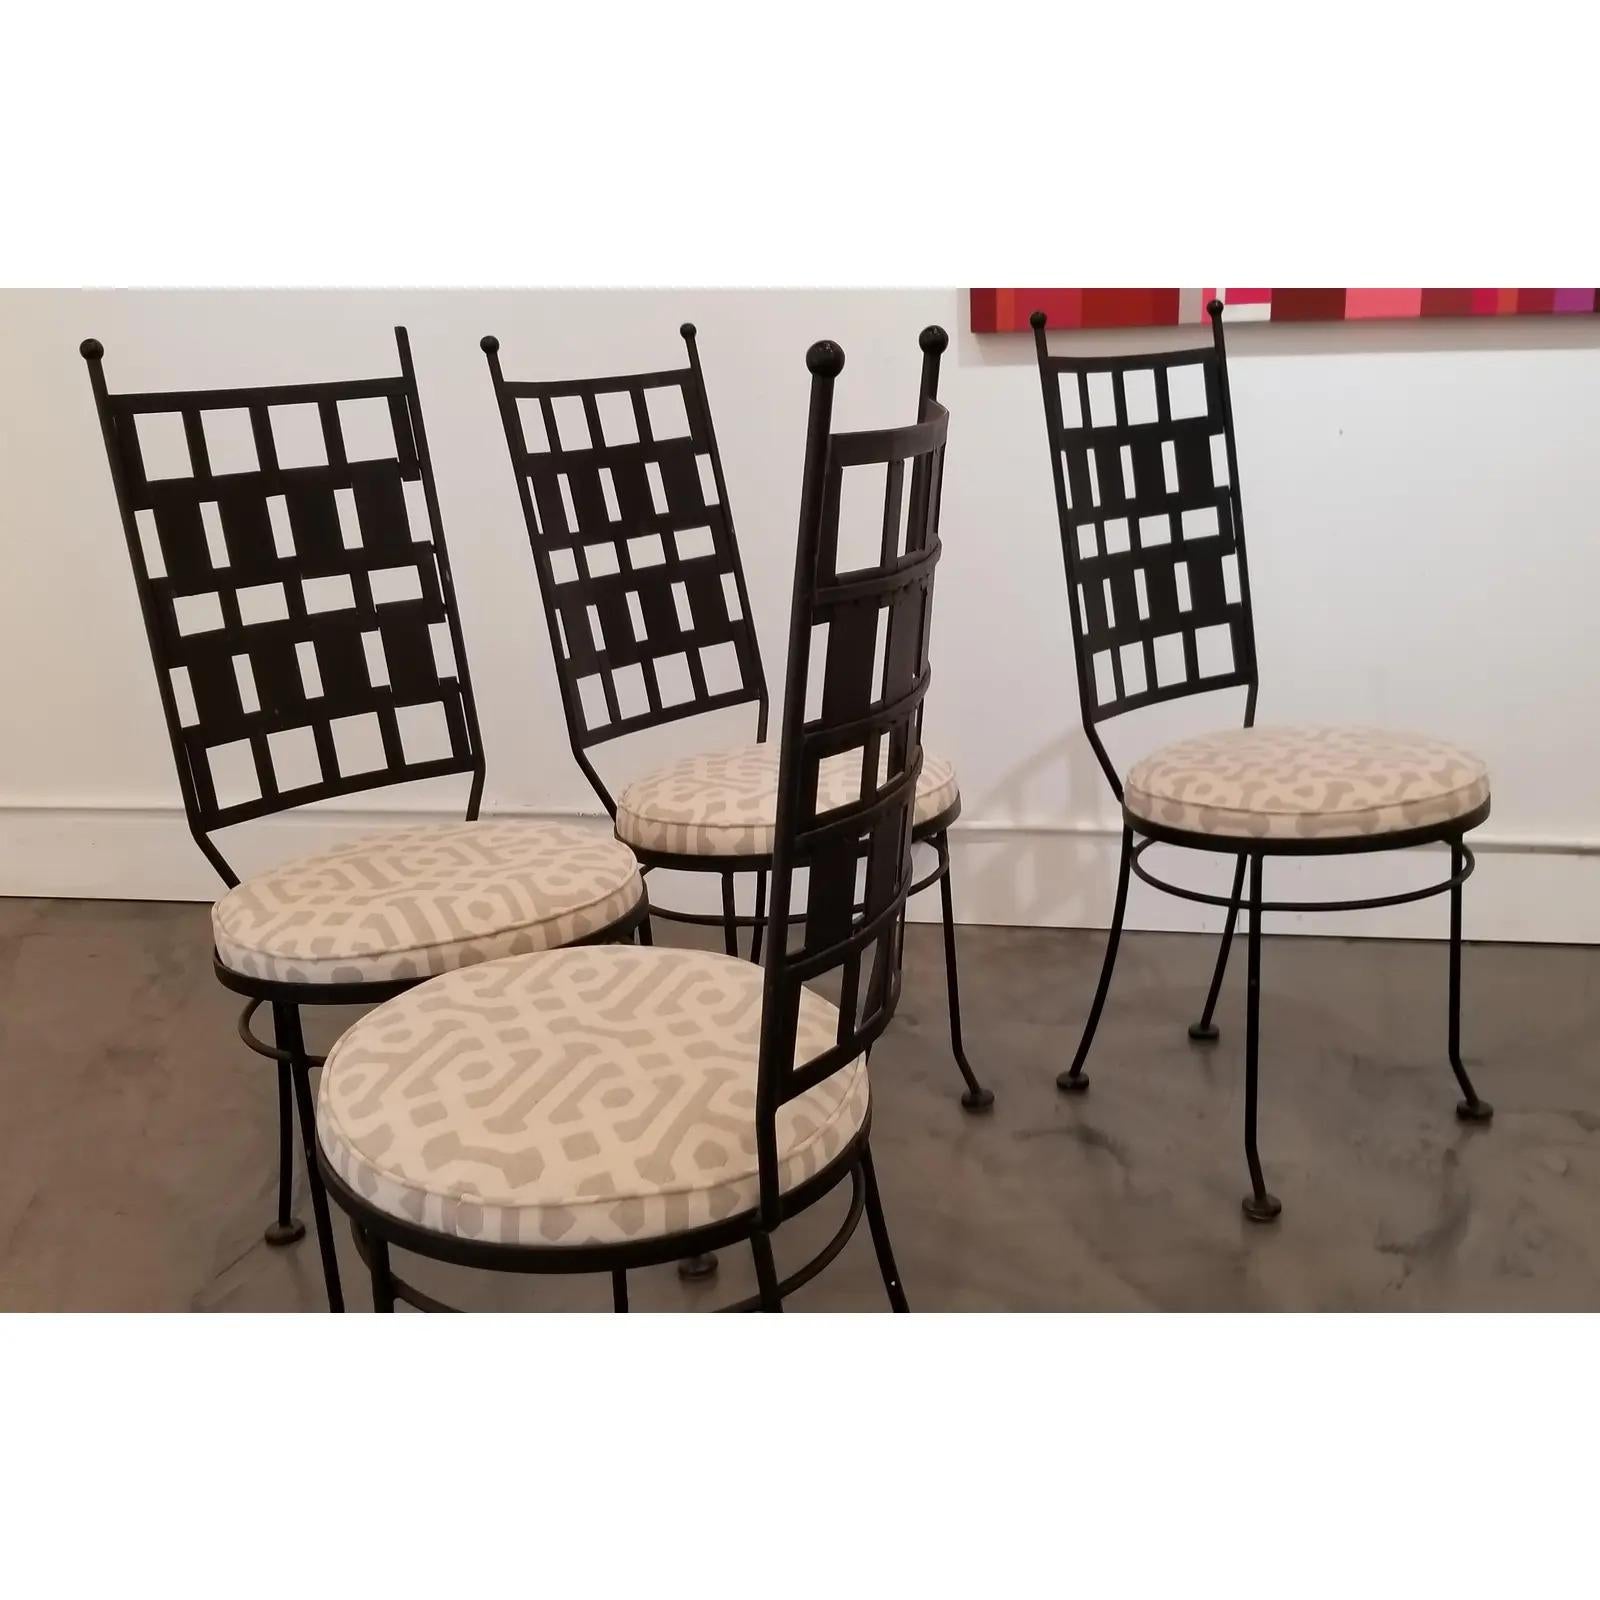 Brutalist Maurizio Tempestini Iron Garden or Dining Chairs